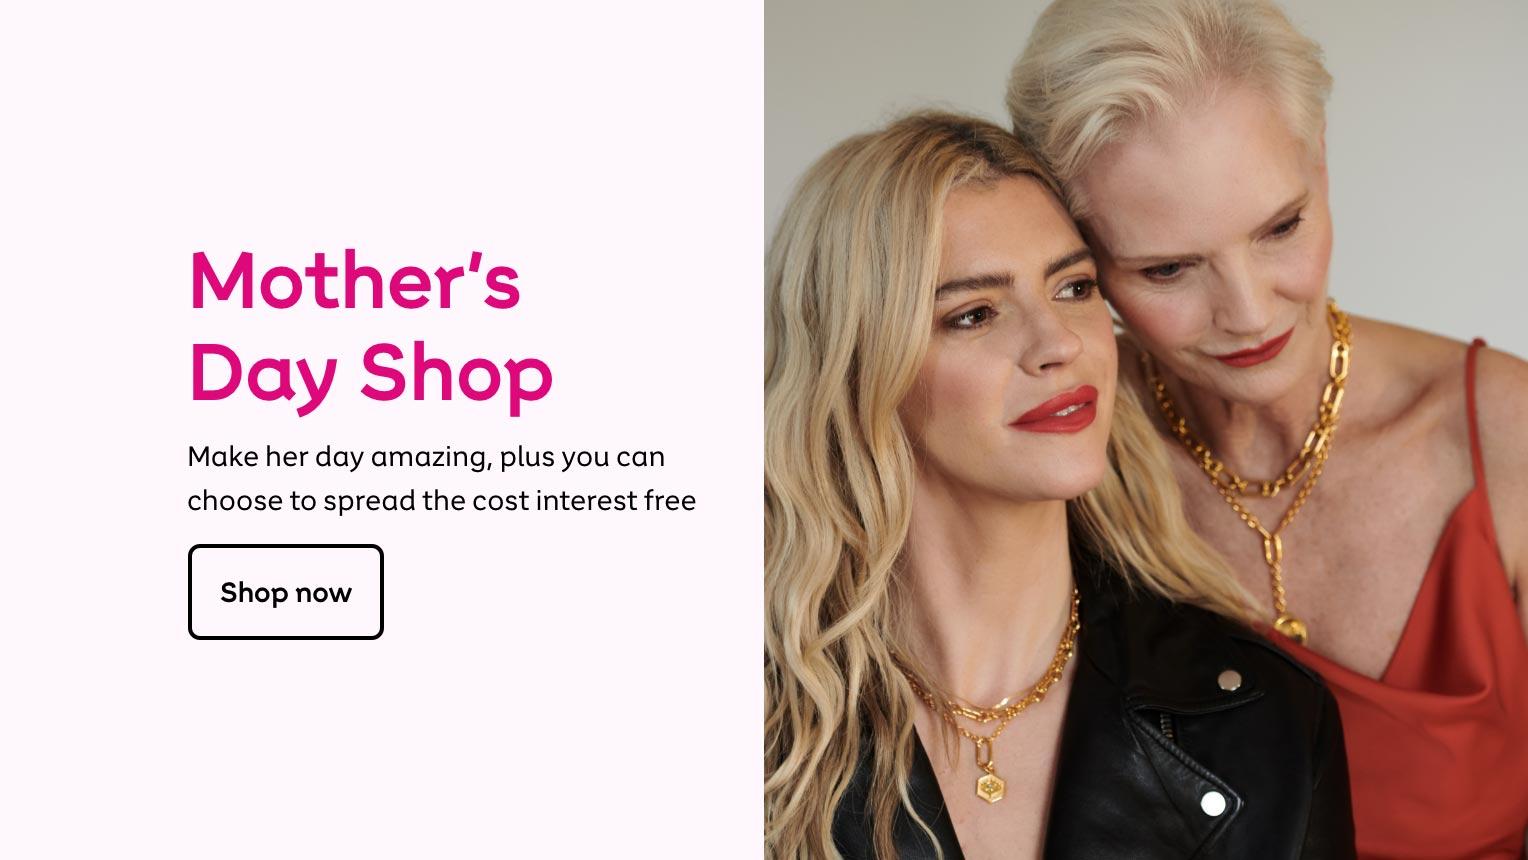 Mother's Day shop. Make her day amazing, plus you can choose to spread the cost interest free. Shop now.